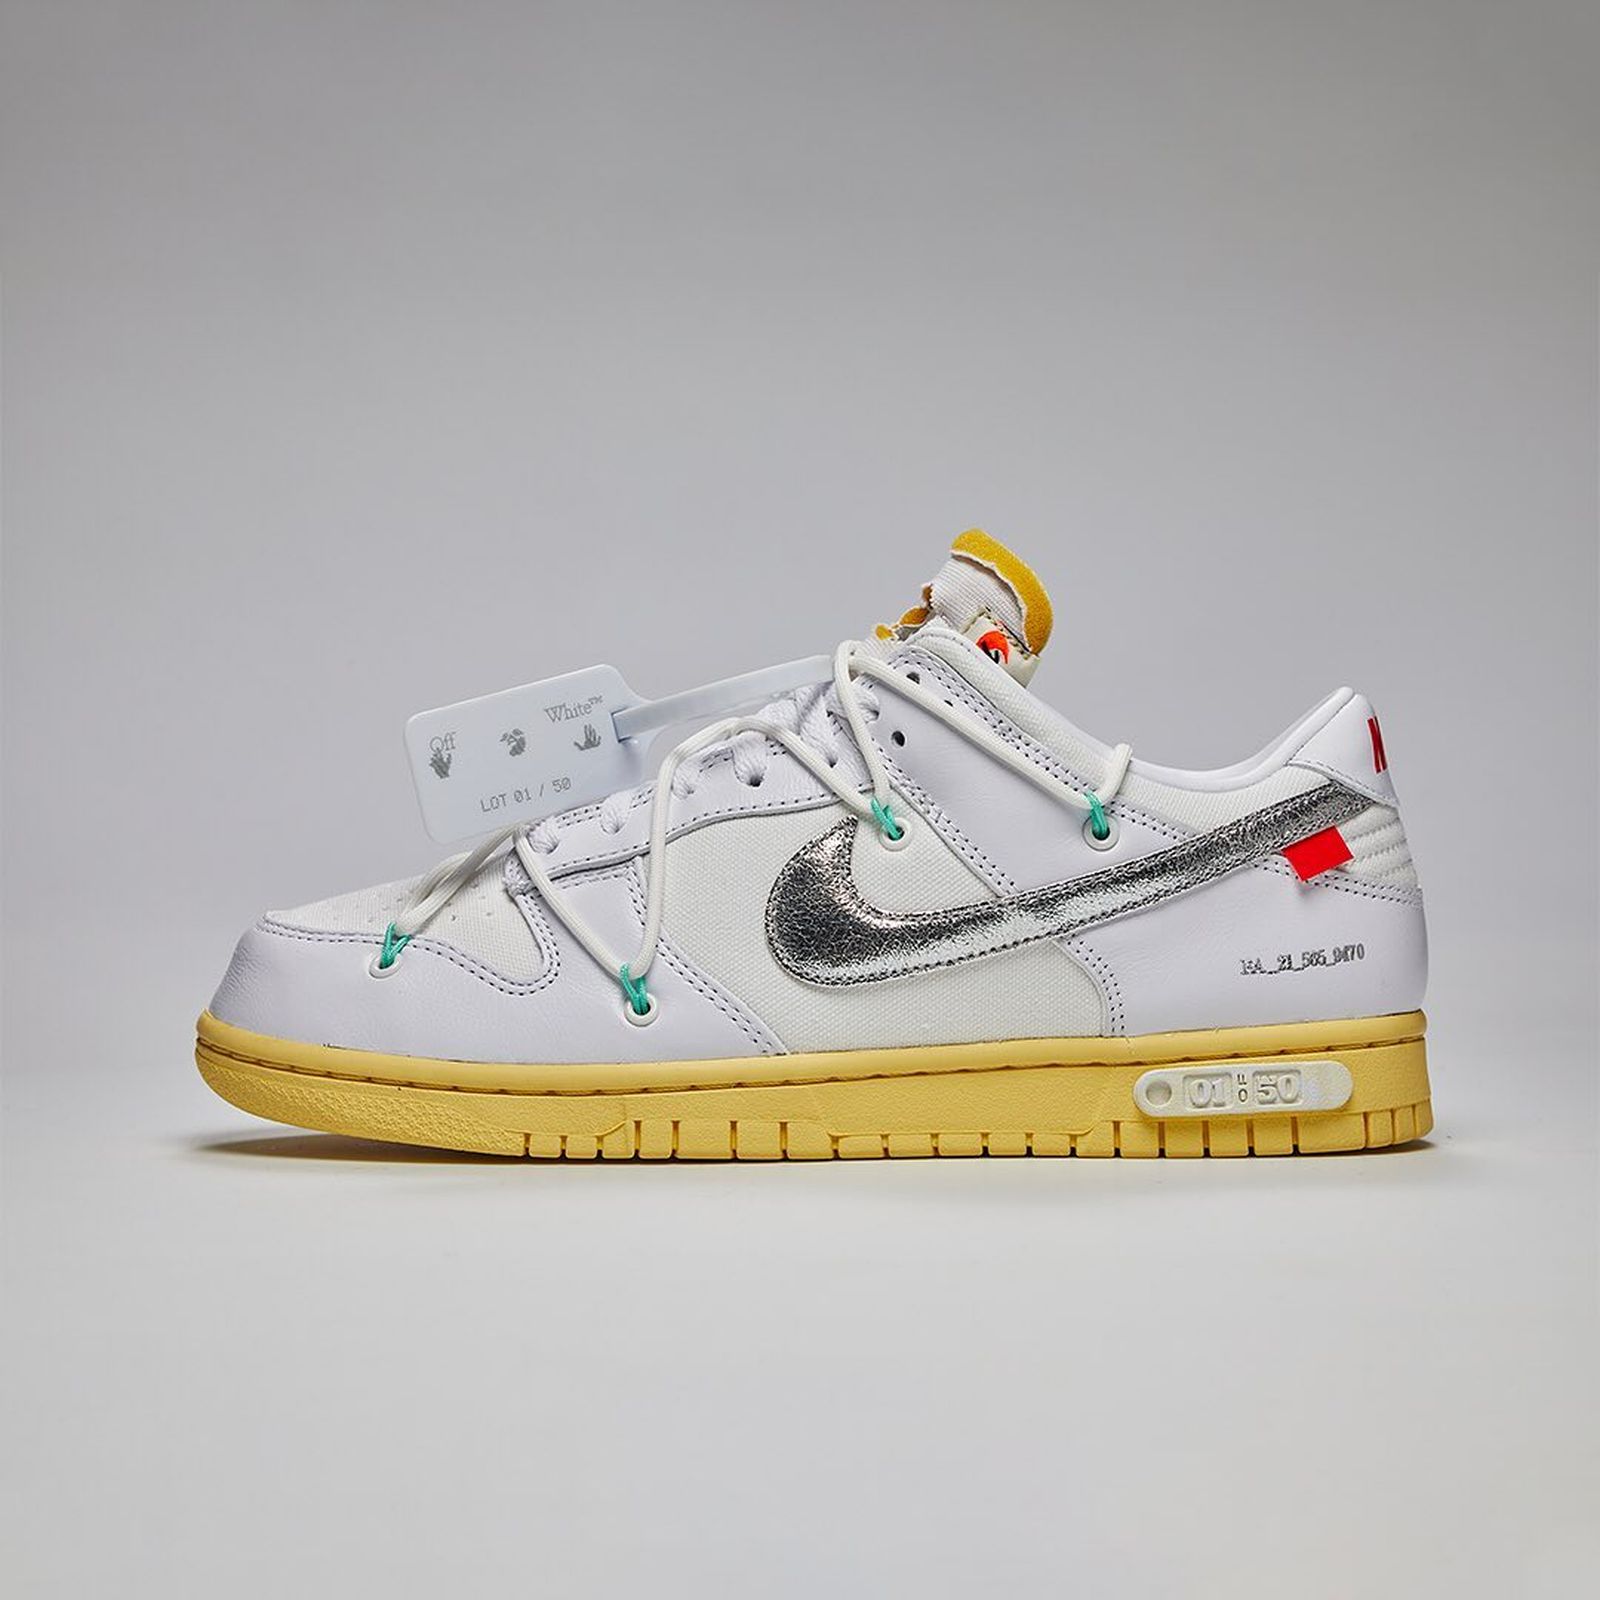 nike-off-white-dunk-low-lot-1-50-2